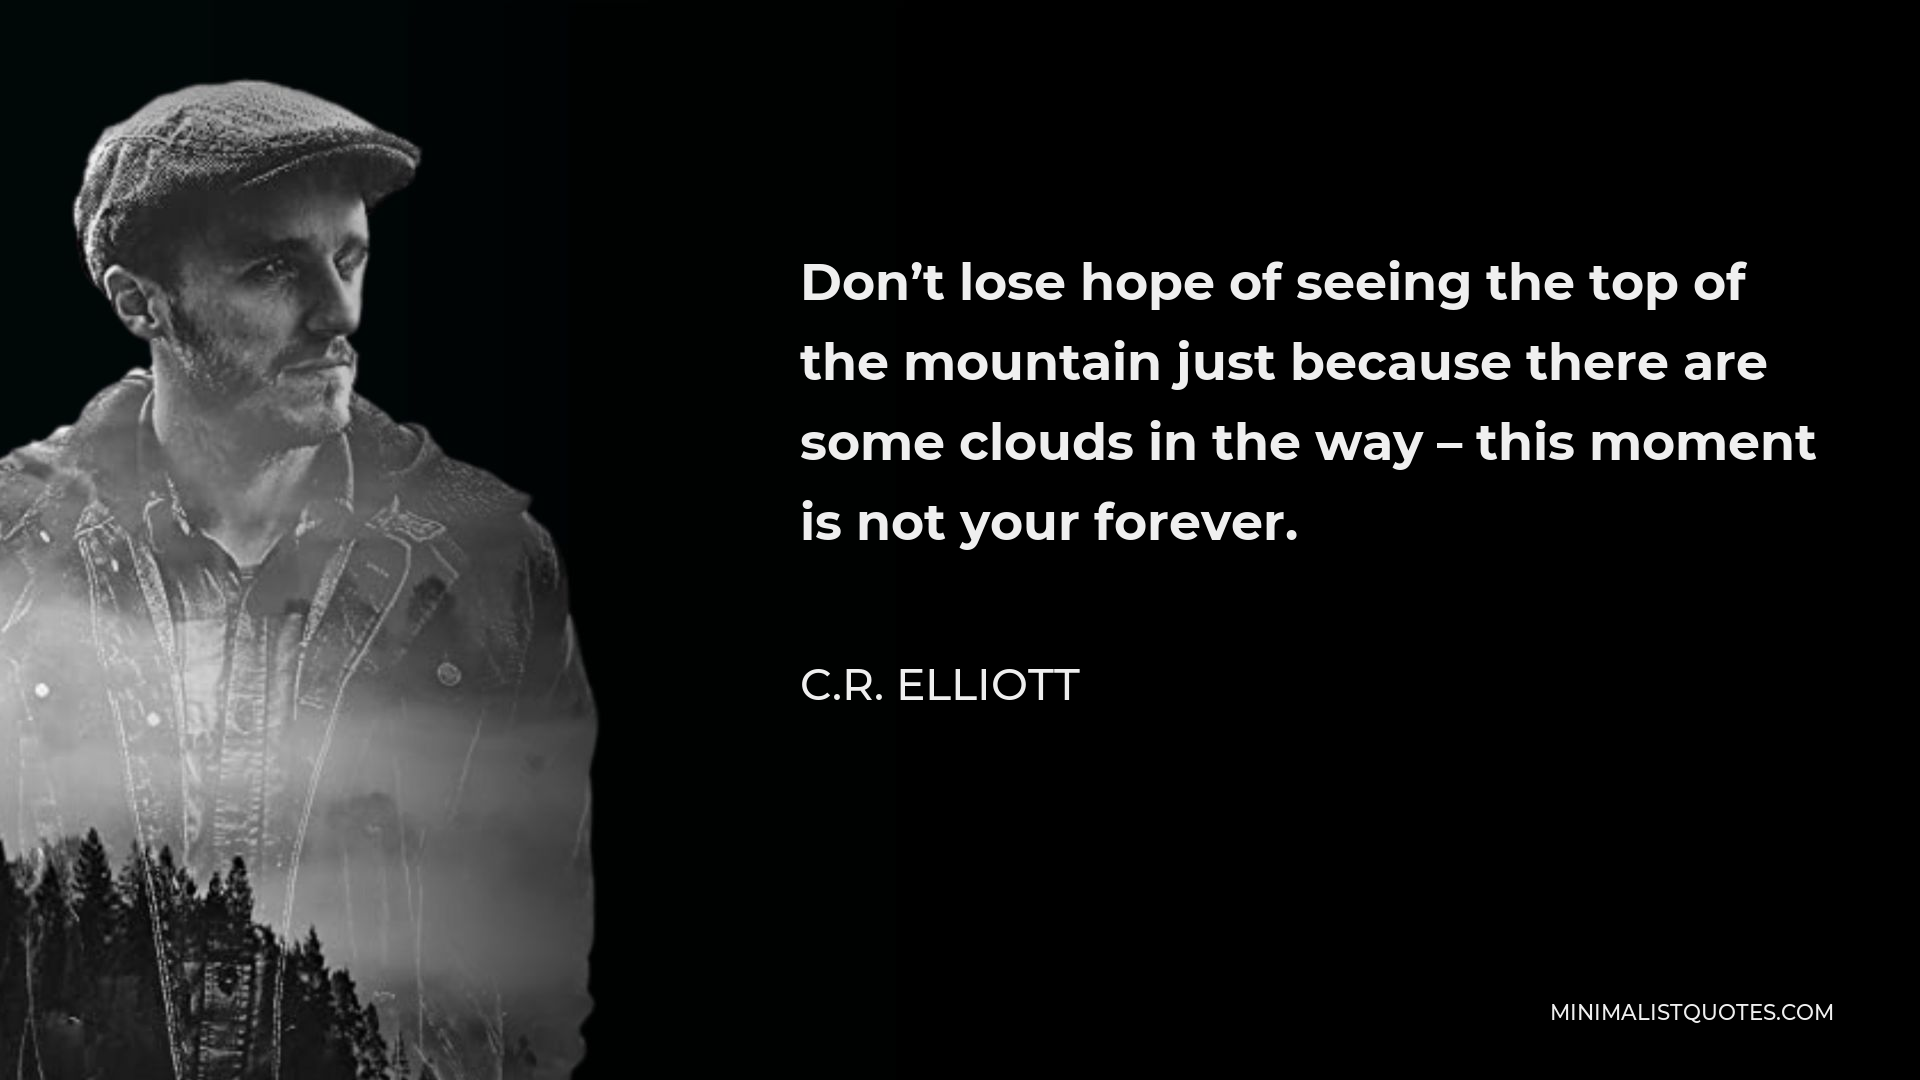 C.R. Elliott Quote - Don’t lose hope of seeing the top of the mountain just because there are some clouds in the way – this moment is not your forever.